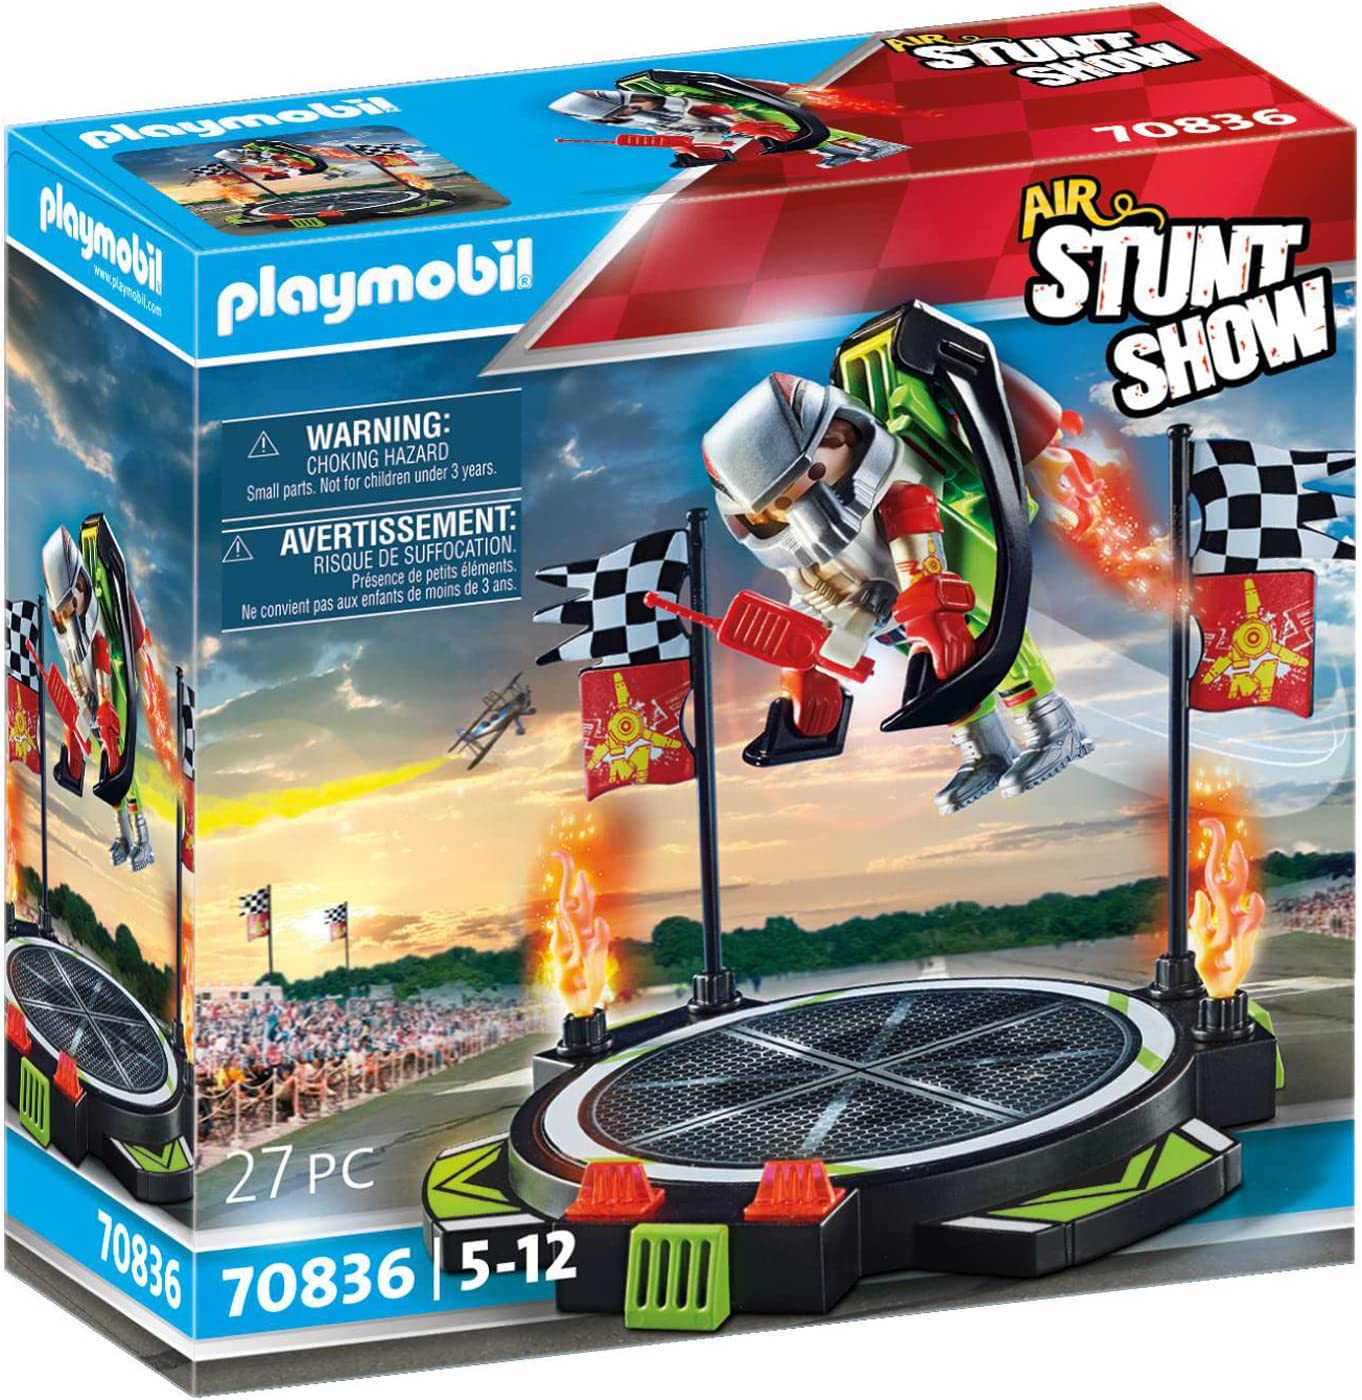 PLAYMOBIL Air Stunt Show 70836 Air Stuntshow Jetpack Aviator with Removable Radio, Gloves, Helmet and Chest Armour, from 5 Years